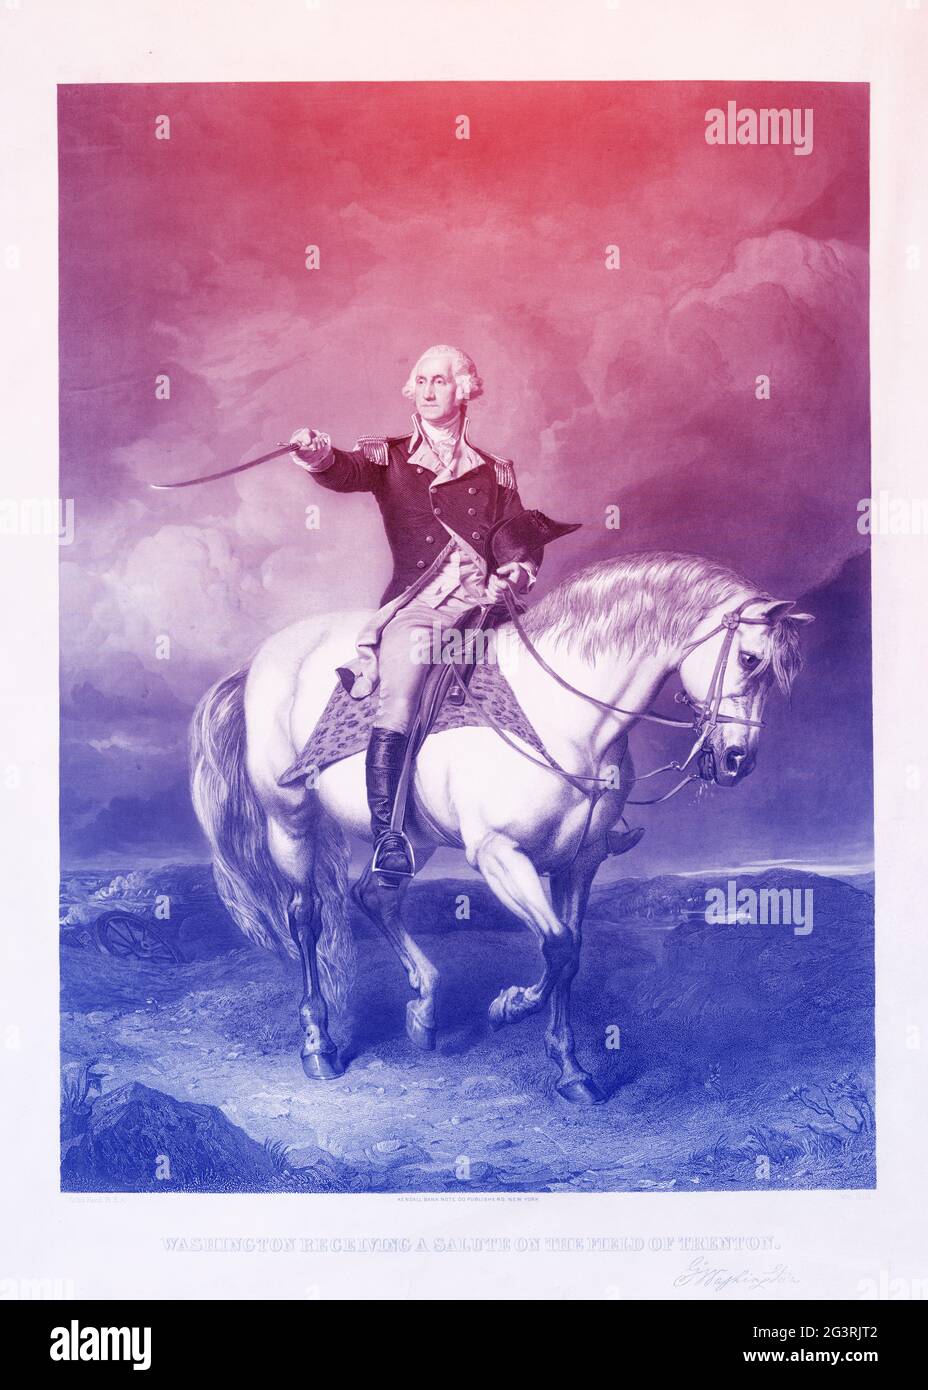 George Washington (1732-1799) engraved illustration. He was the Founding Father of USA and the first president. In American Revolutionary War Stock Photo